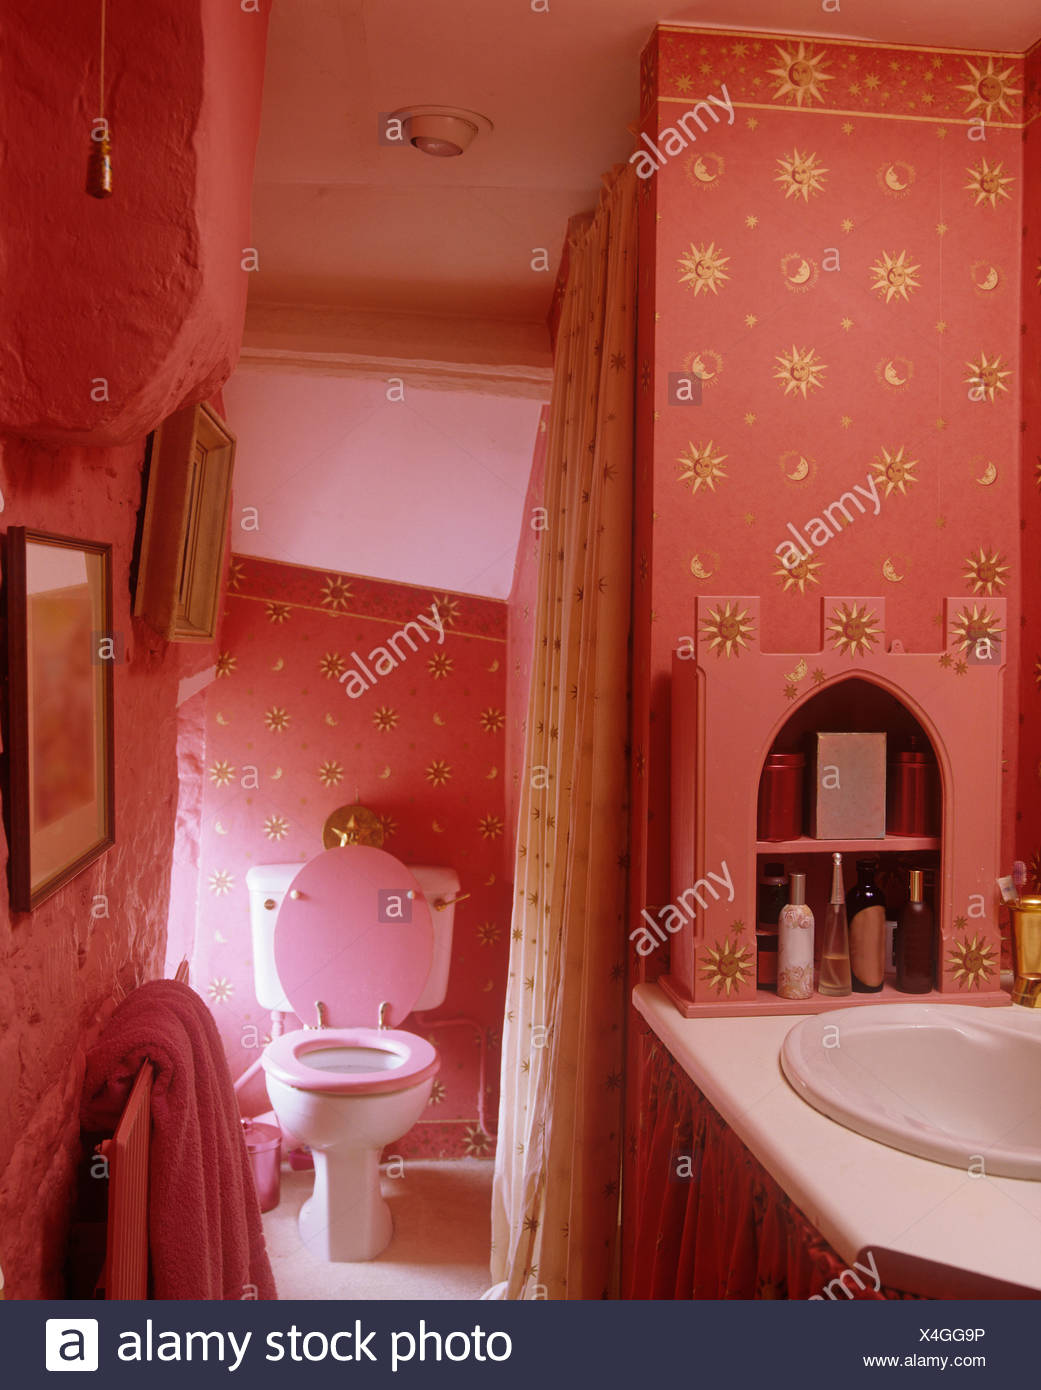 toilet with pink seat Stock Photo ...